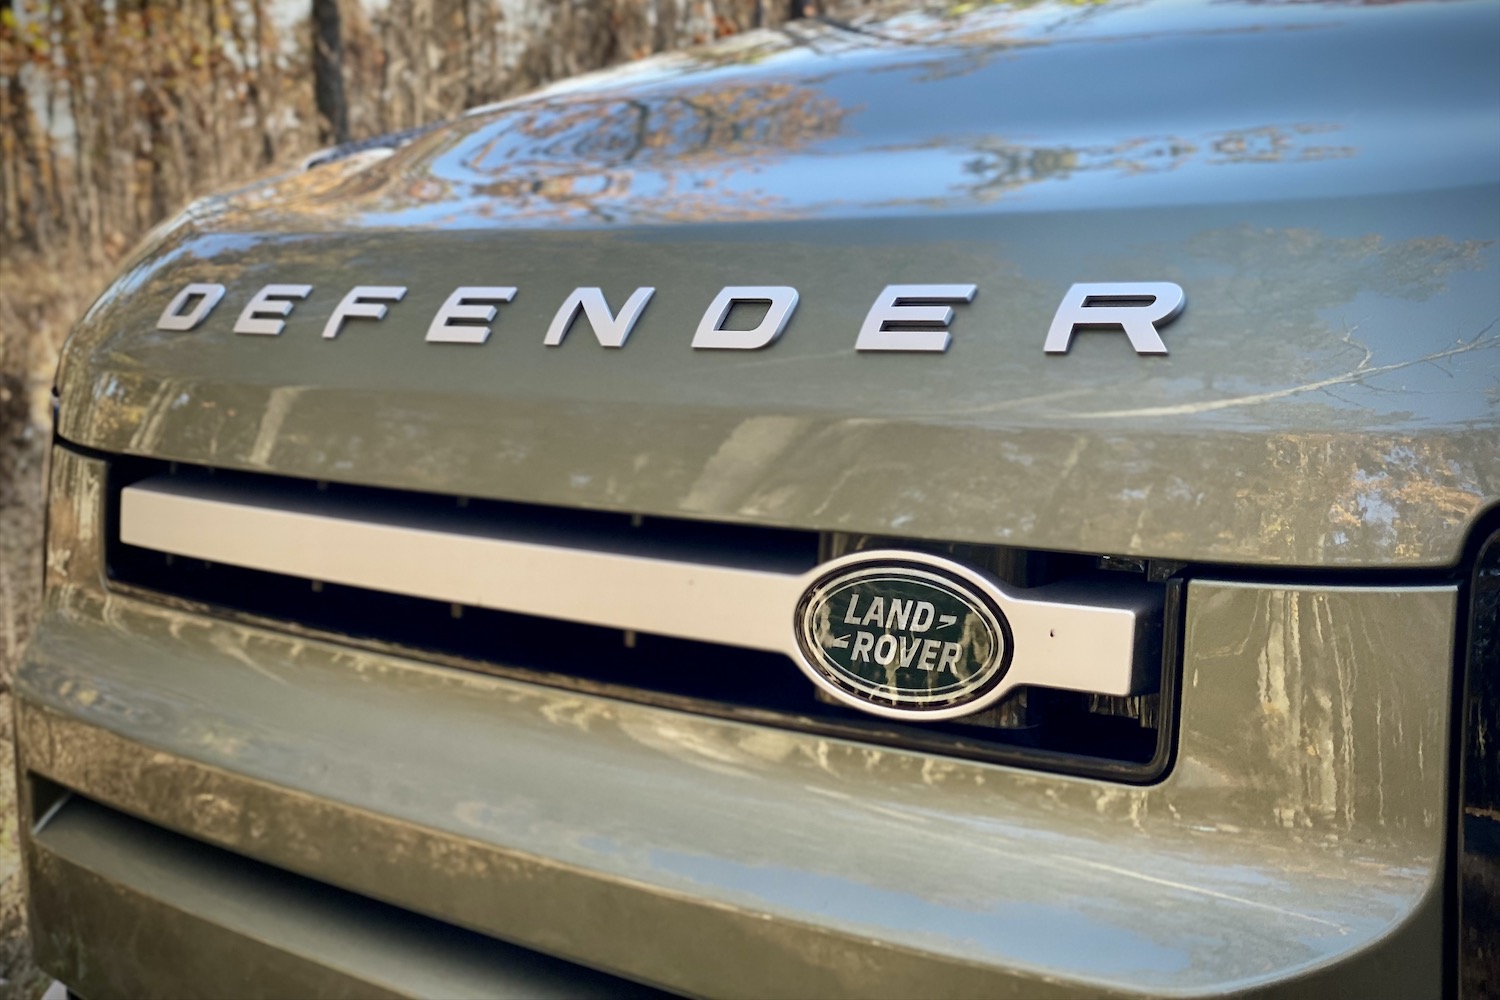 Close up of Land Rover Defender badge and grille.